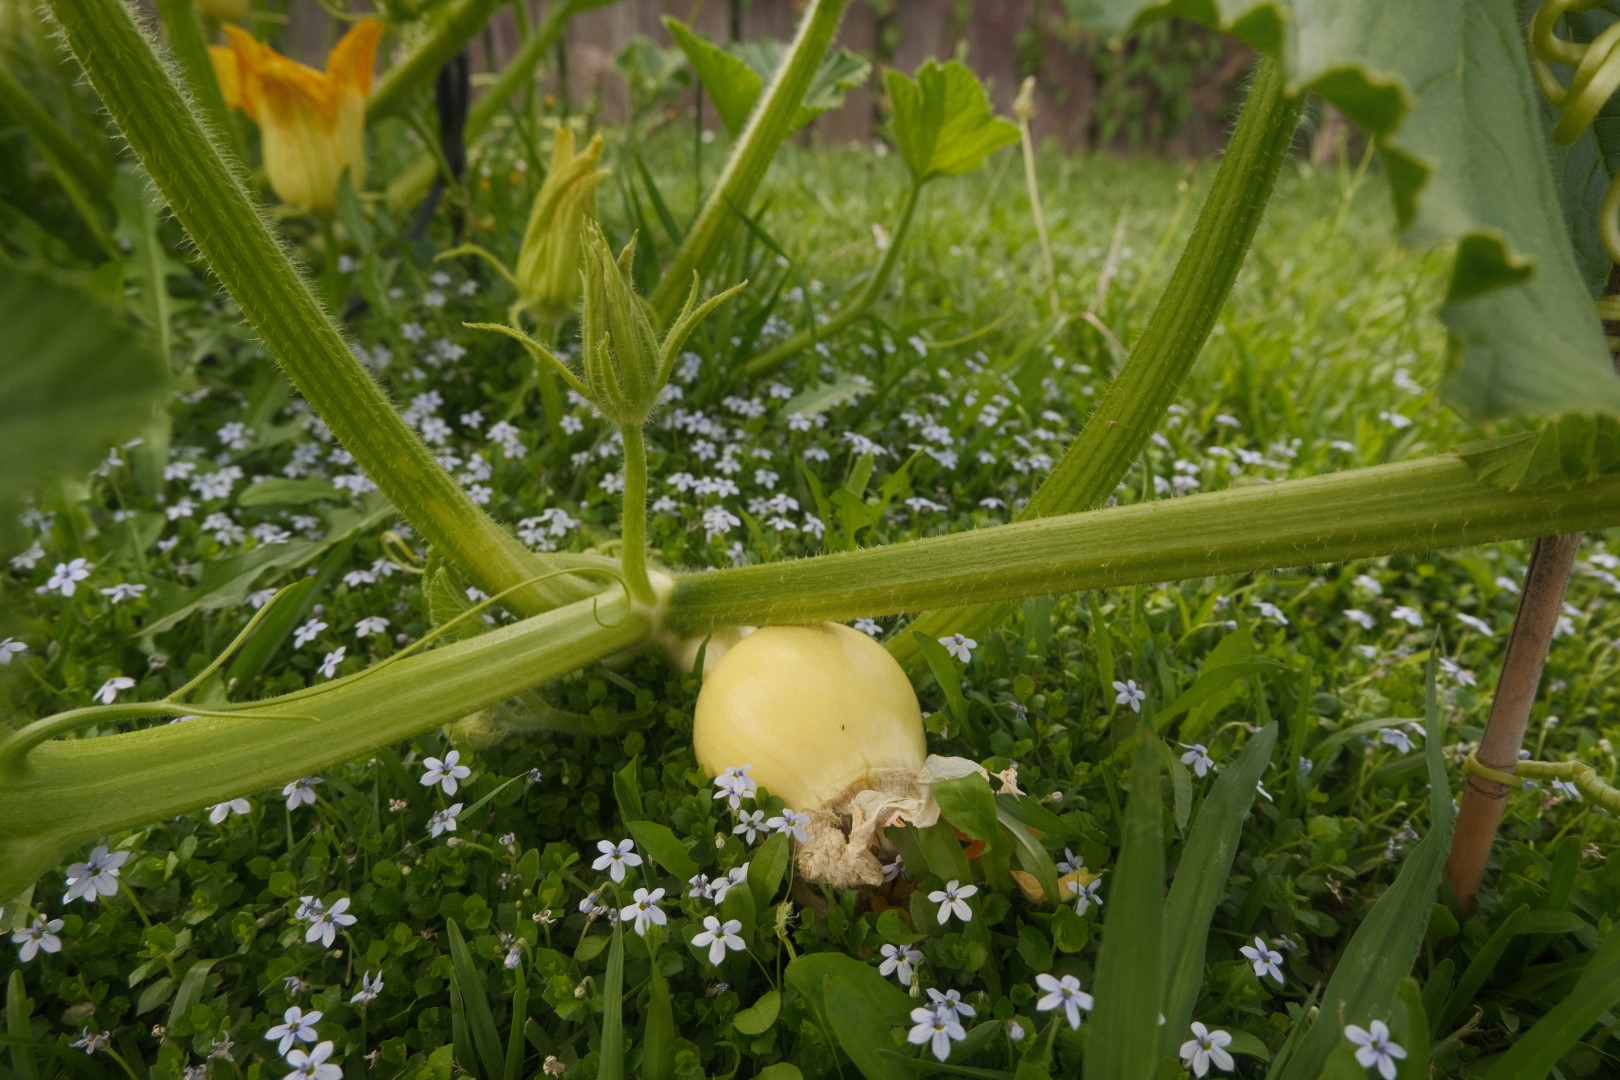 A yellow squash growing on a vine in a garden.